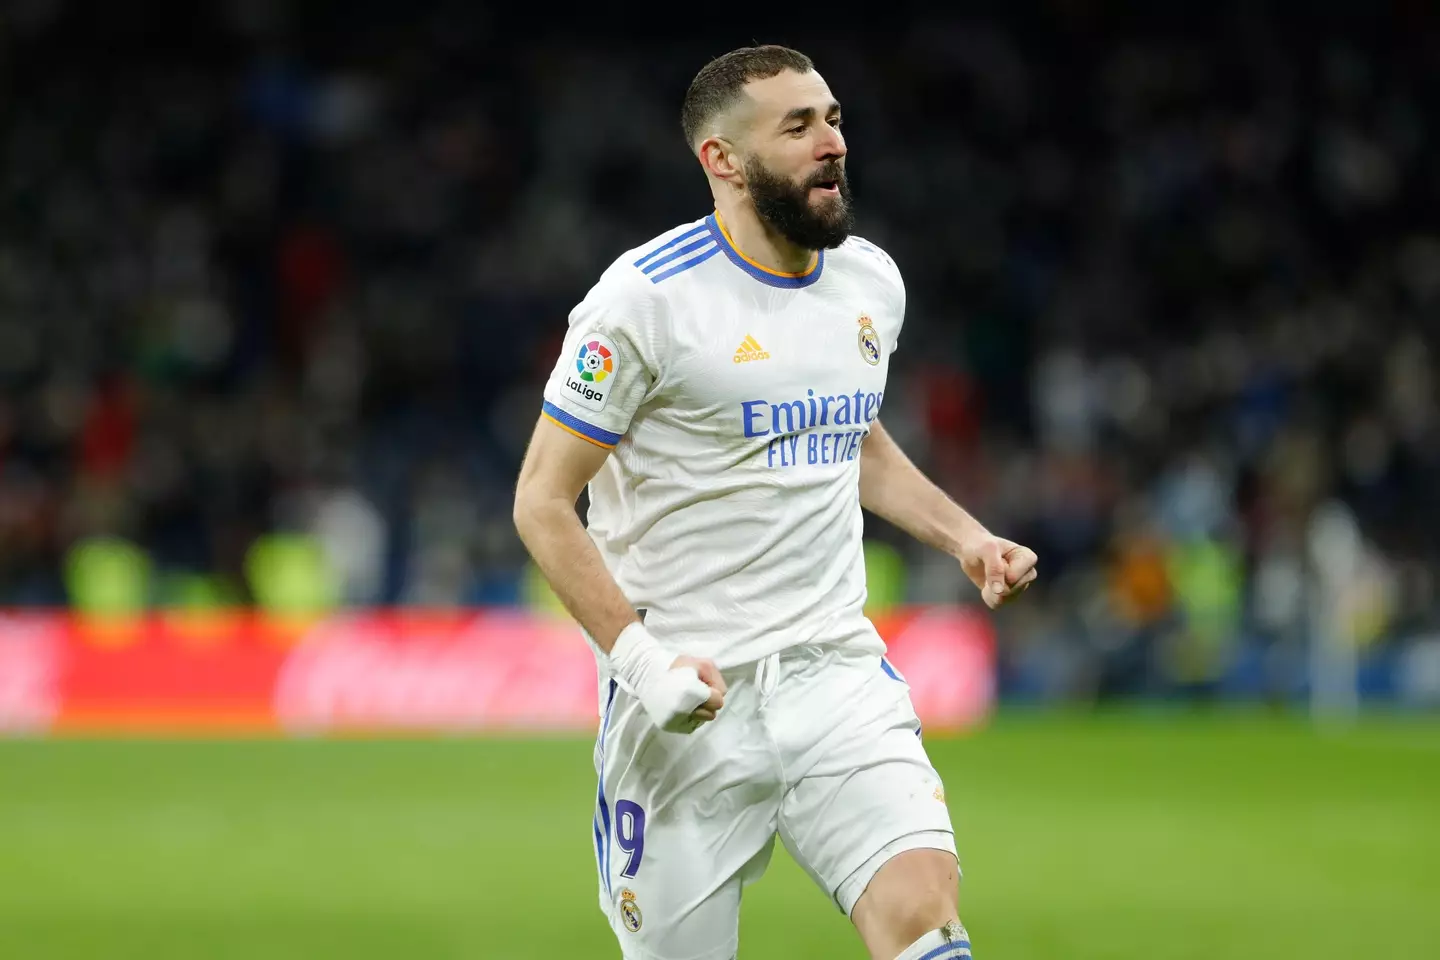 Benzema will come up against Messi in the Champions League (Image: Alamy)